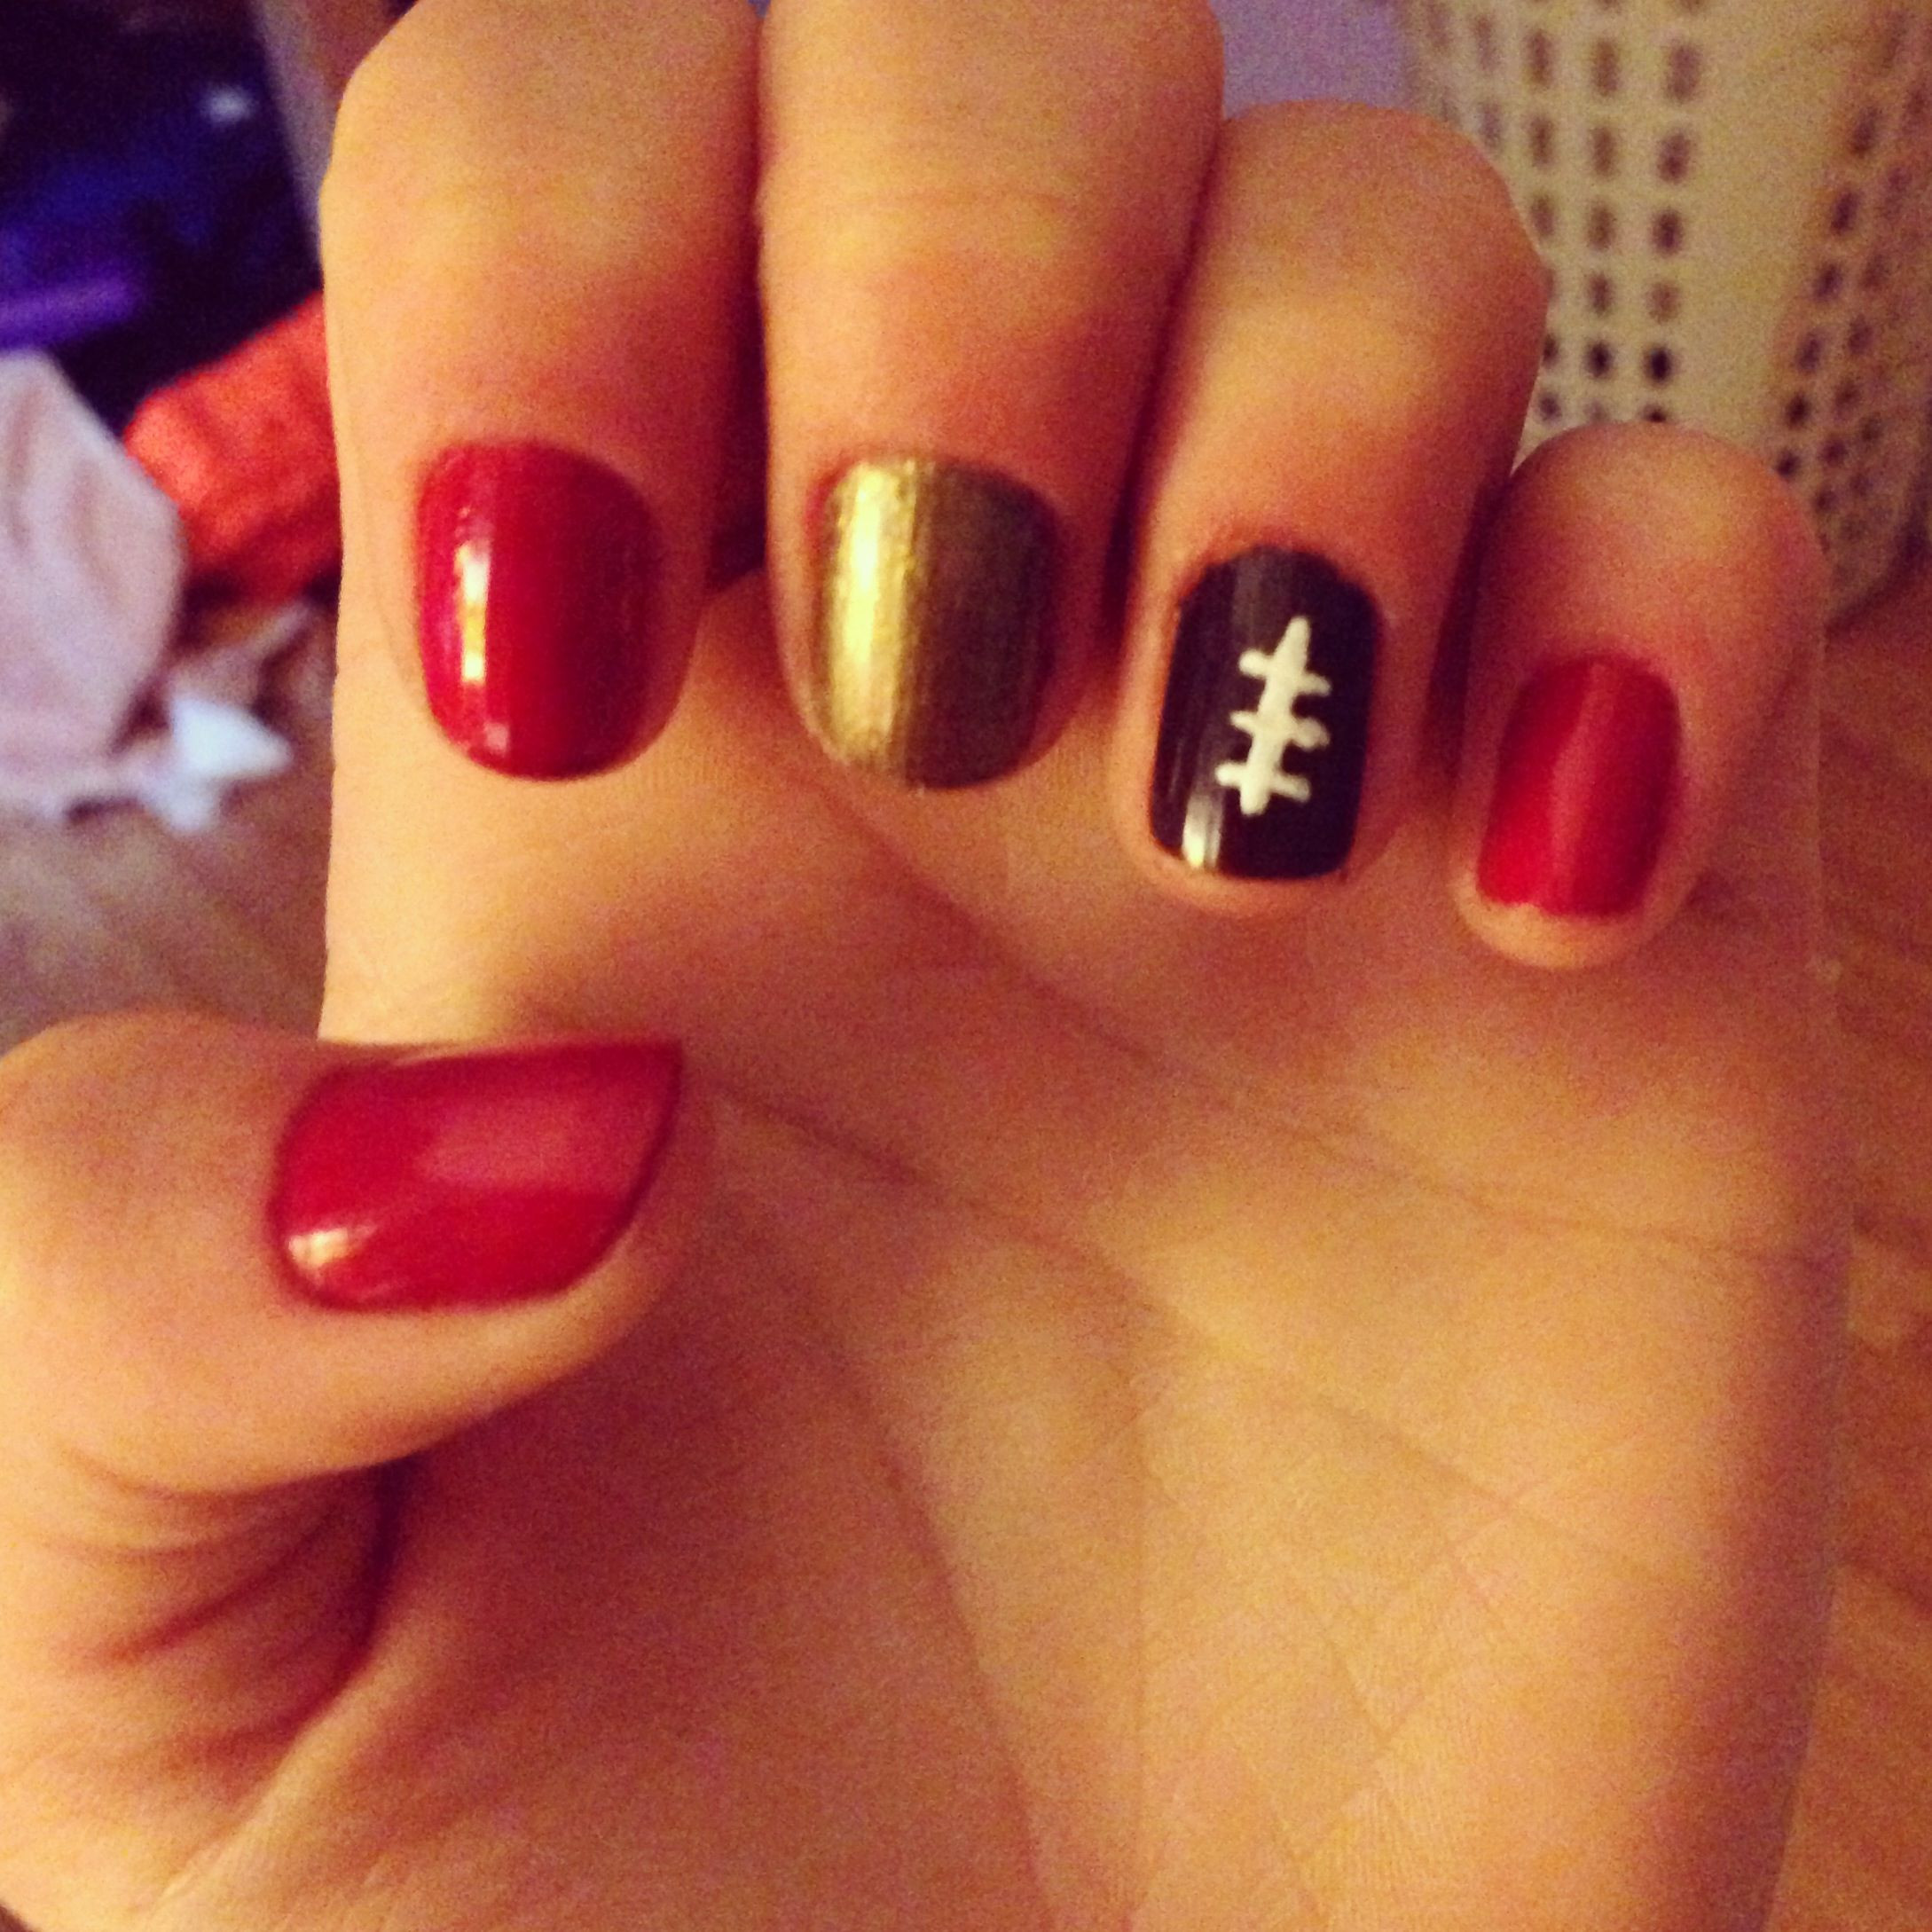 49er Nail Designs
 49ers football nails r the girly Niners fans